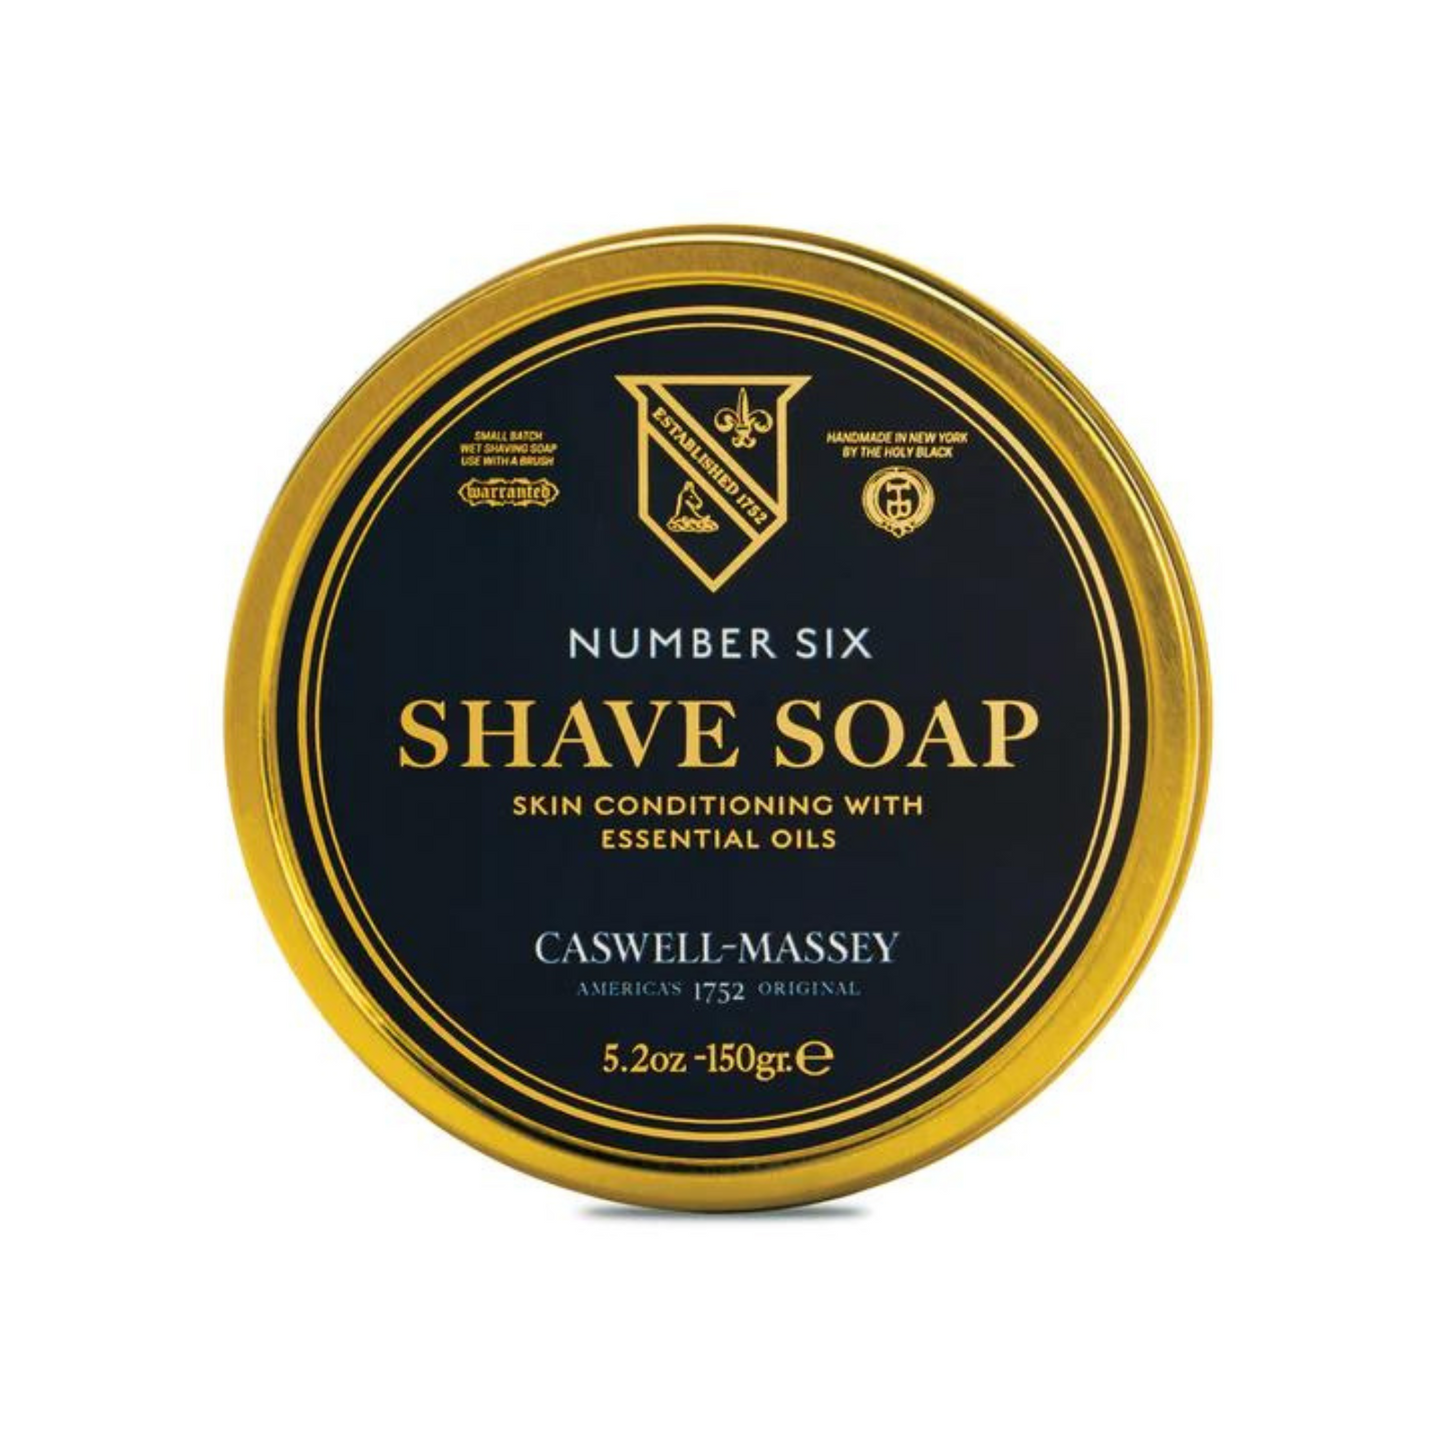 Primary Image of Six Shave Soap (5.2 oz)